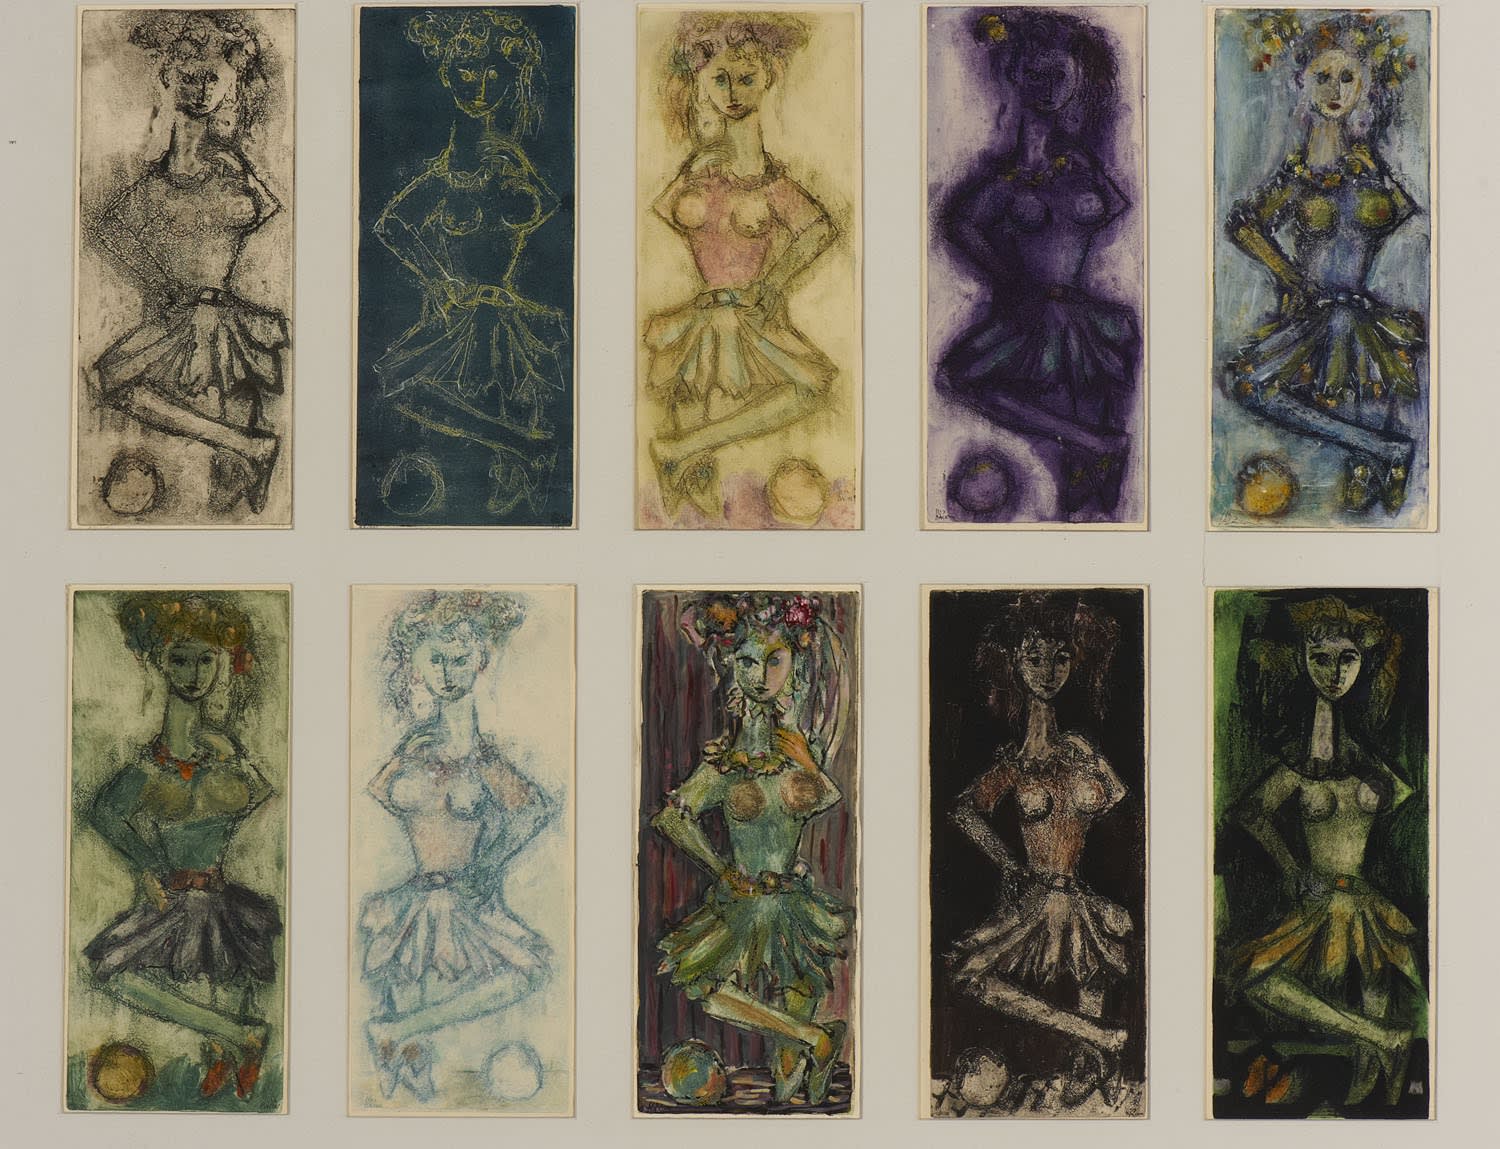 Yehuda Bacon (1929-) Variations on a Theme (10 coloured etchings) 1957 Coloured etchings on paper 24.6 x 10.1 cm Ben Uri Collection © Yehuda Bacon